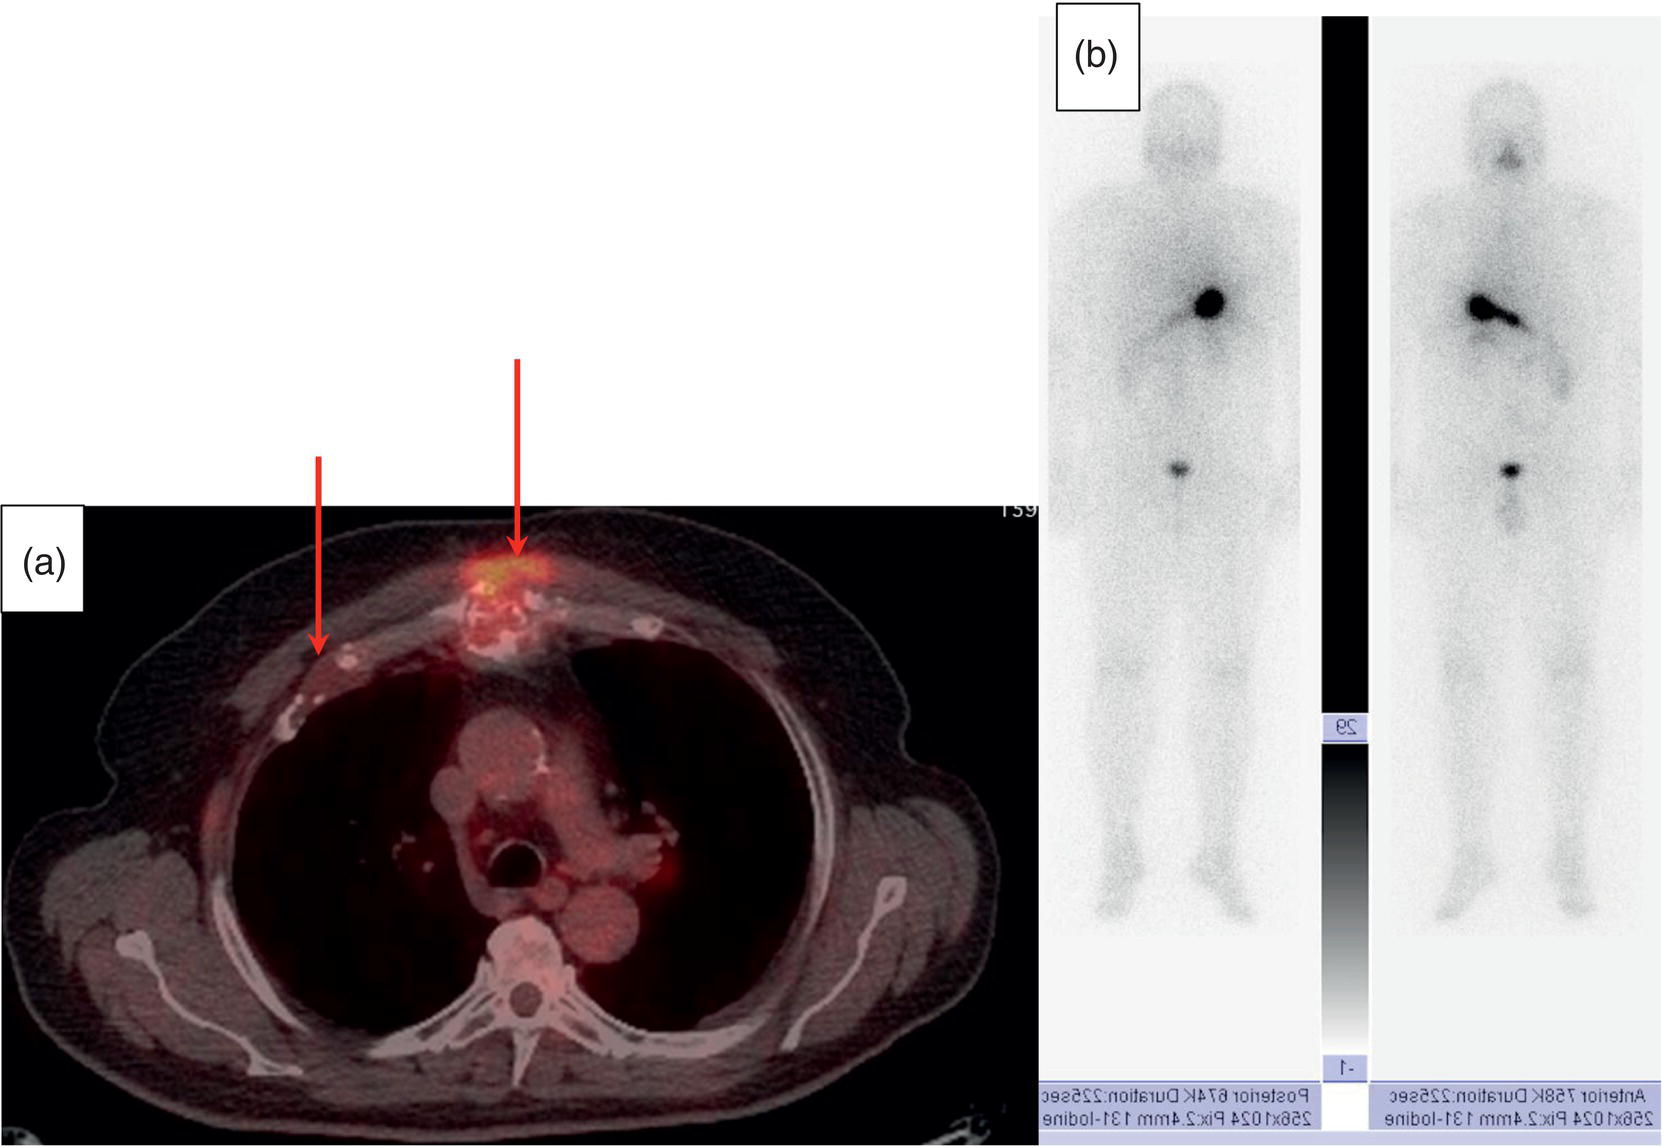 Schematic illustration of axial image of the chest of 18F-FDG PET/CT in a 62-year-old man with follicular thyroid carcinoma radically treated by surgery and radioiodine therapy. The hybrid image PET/CT (a) shows sternal and rib metastatic lesions, despite the negative 131I whole-body scan (b).